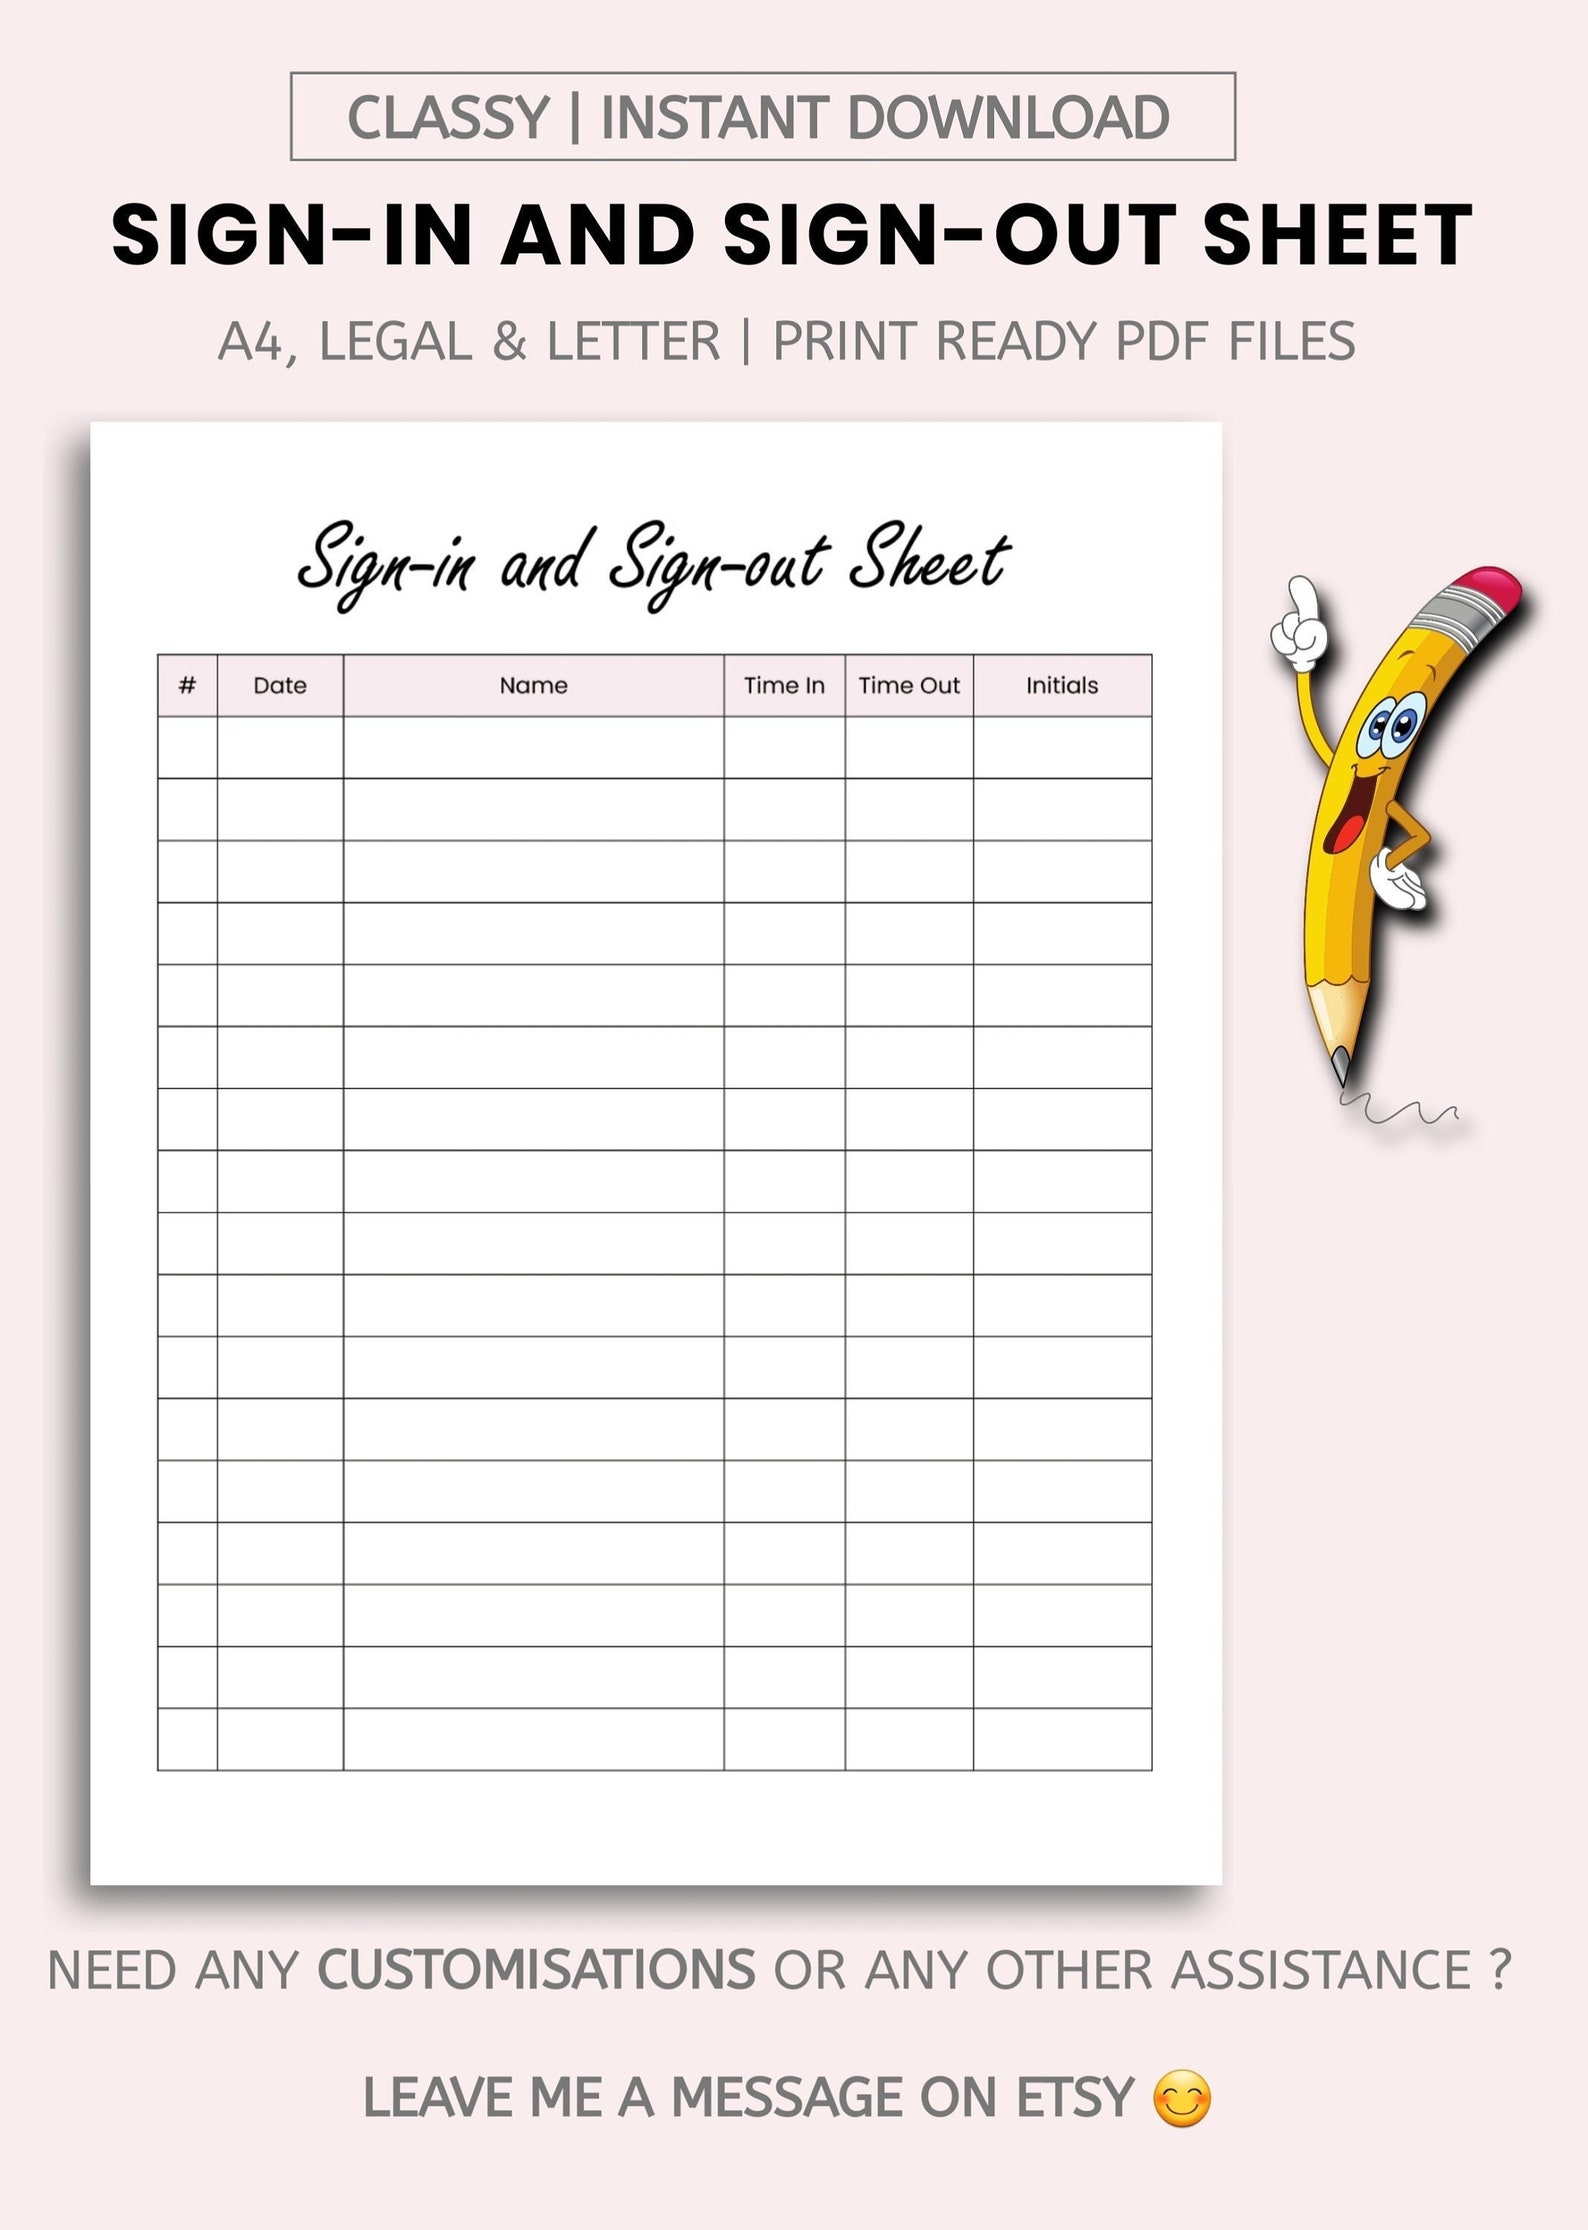 sign-in-sign-out-sheet-template-printable-sign-in-and-sign-out-sheet